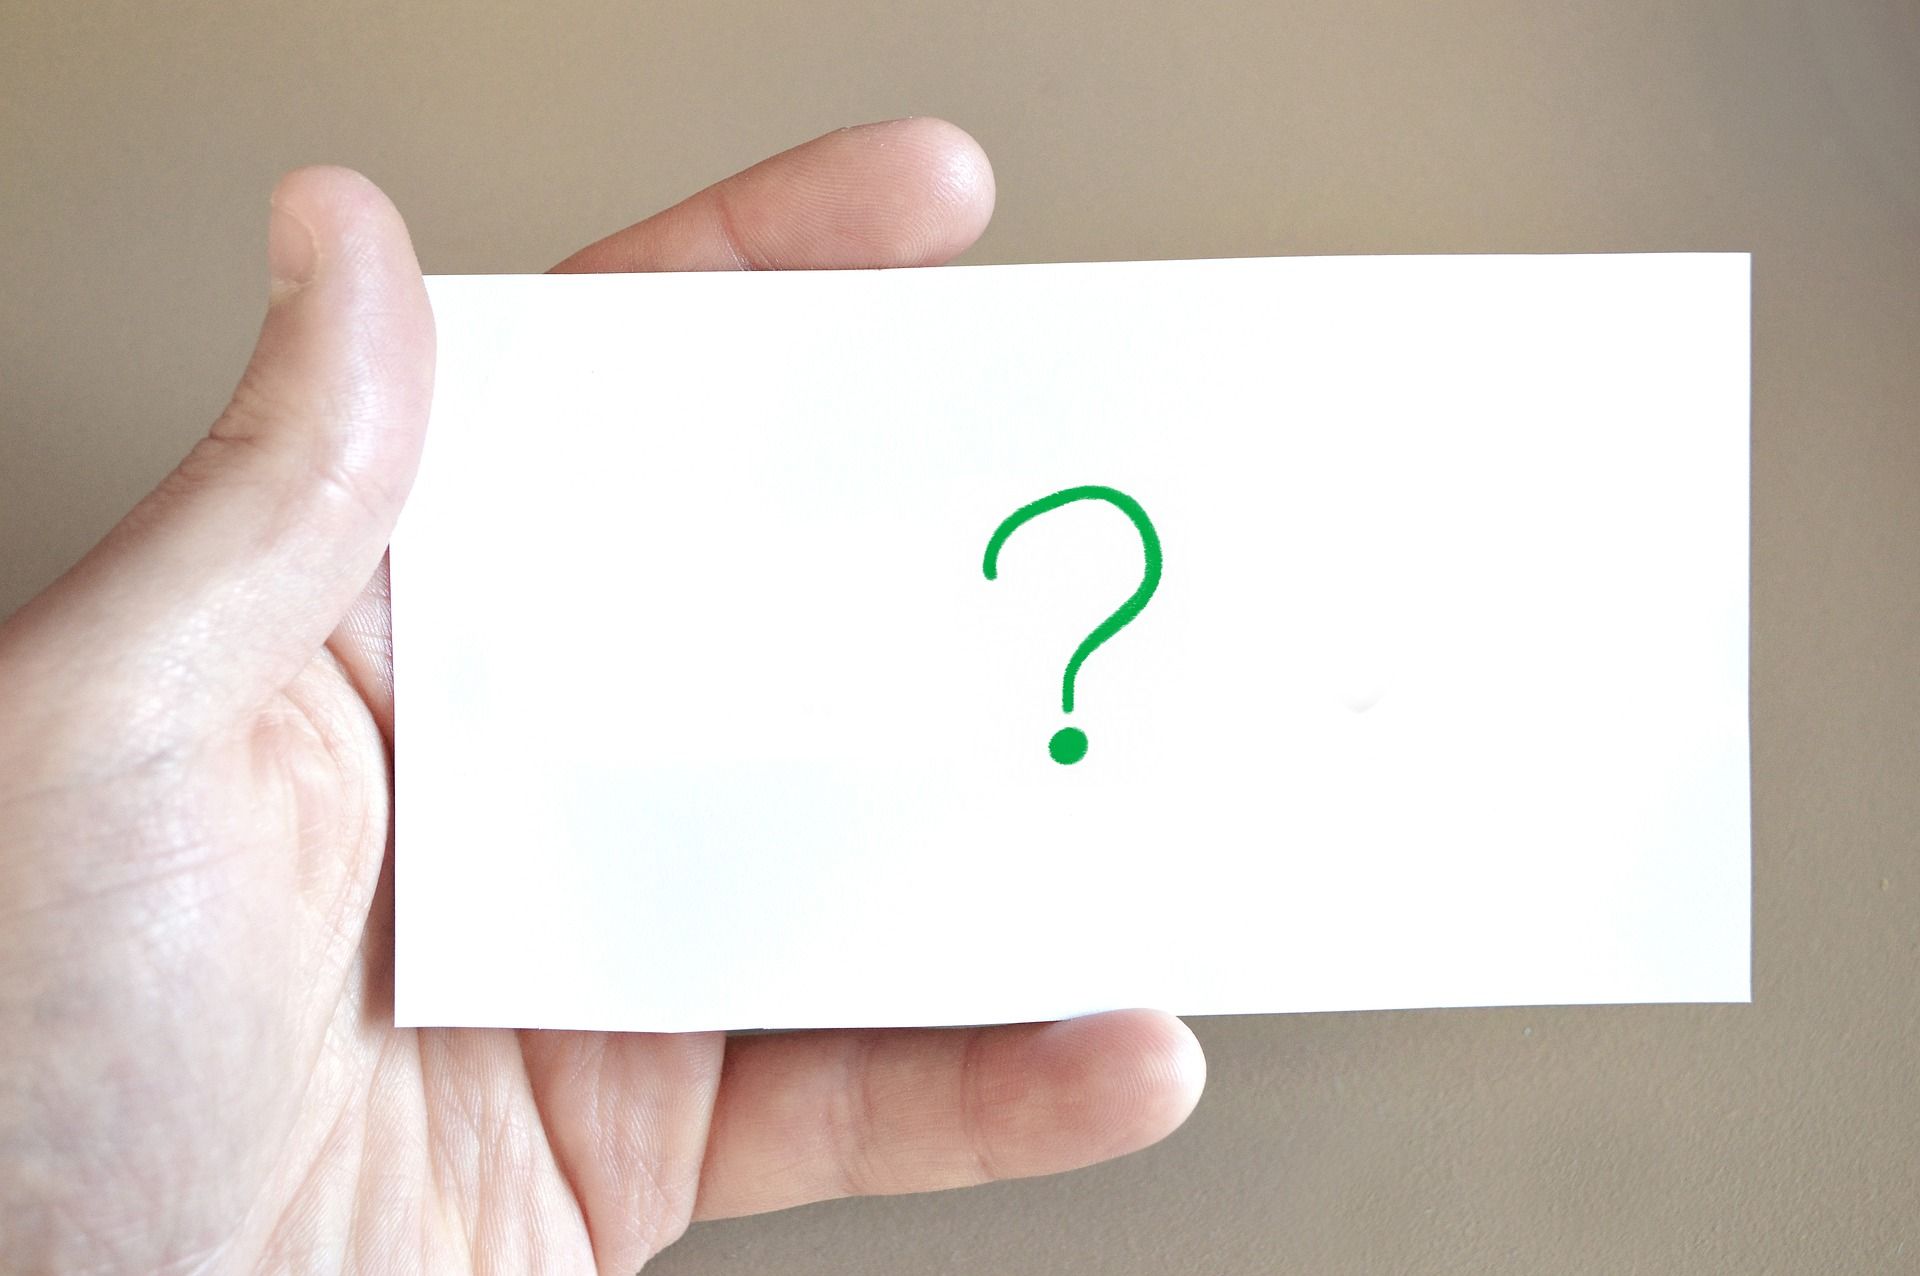 One card with question mark; NCLEX practice questions